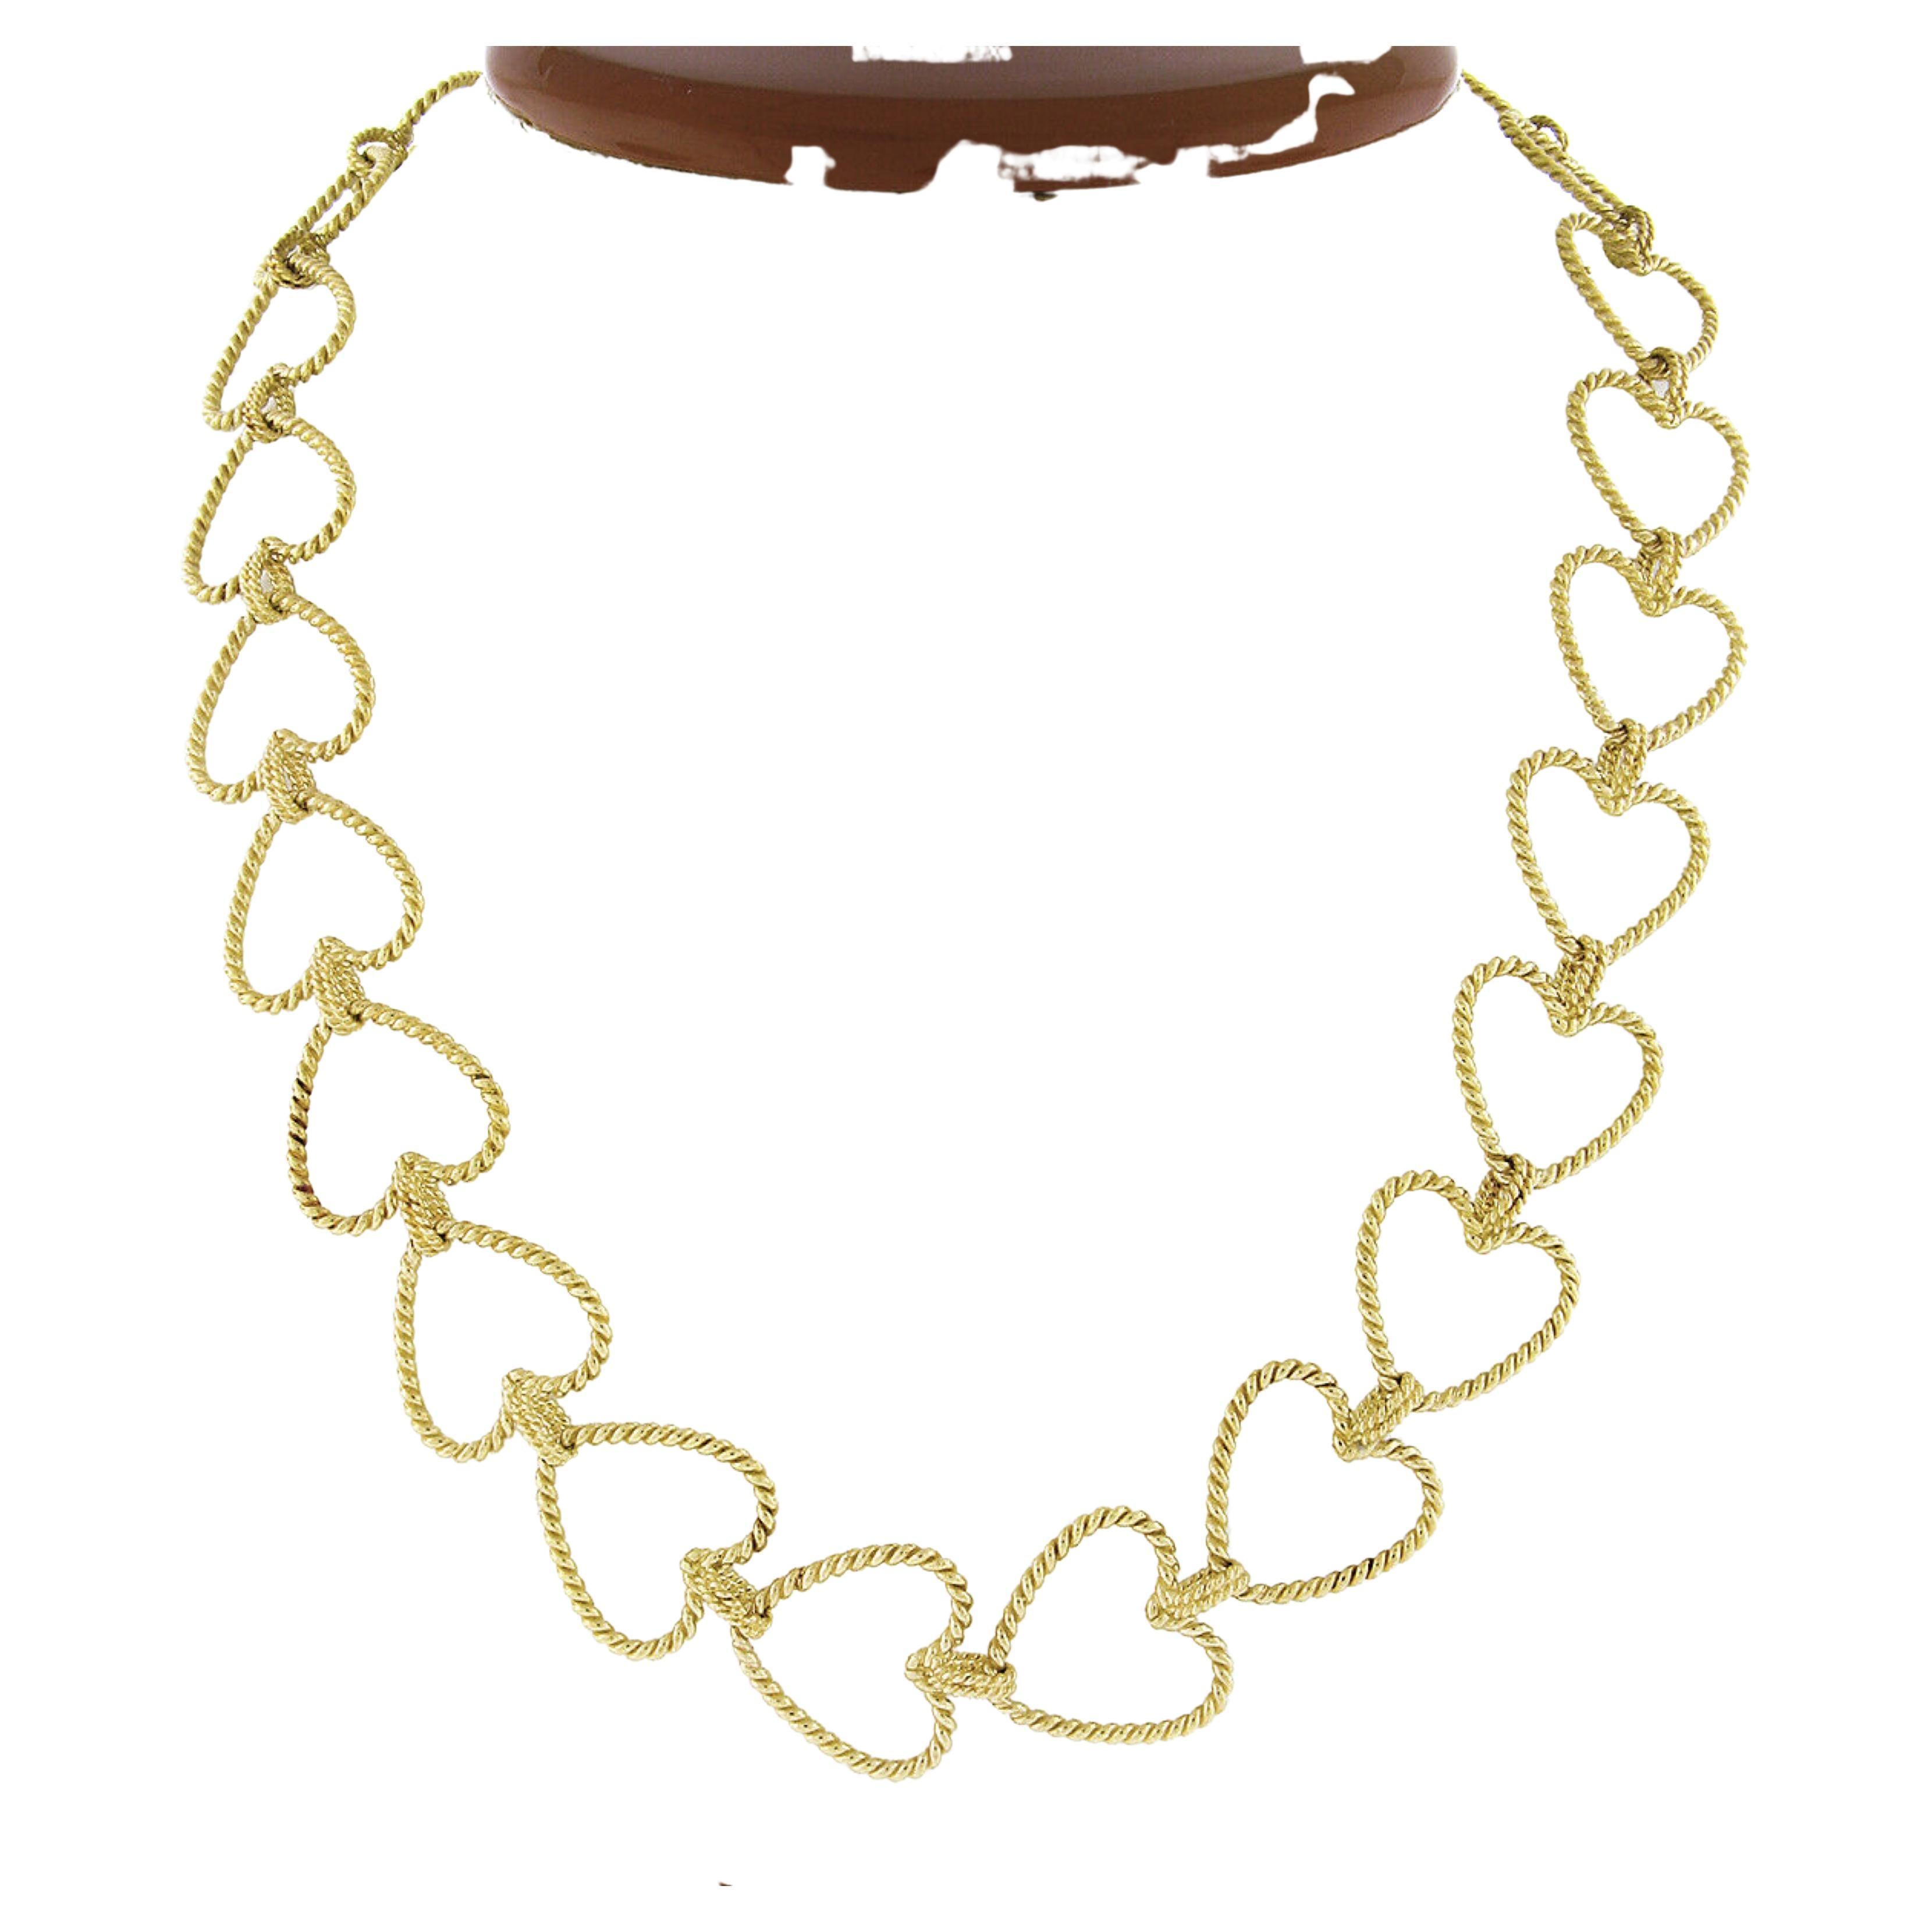 Vera Wang 18K Gold Cable Open Heart Link Chain Necklace w/ Diamond Toggle Clasp